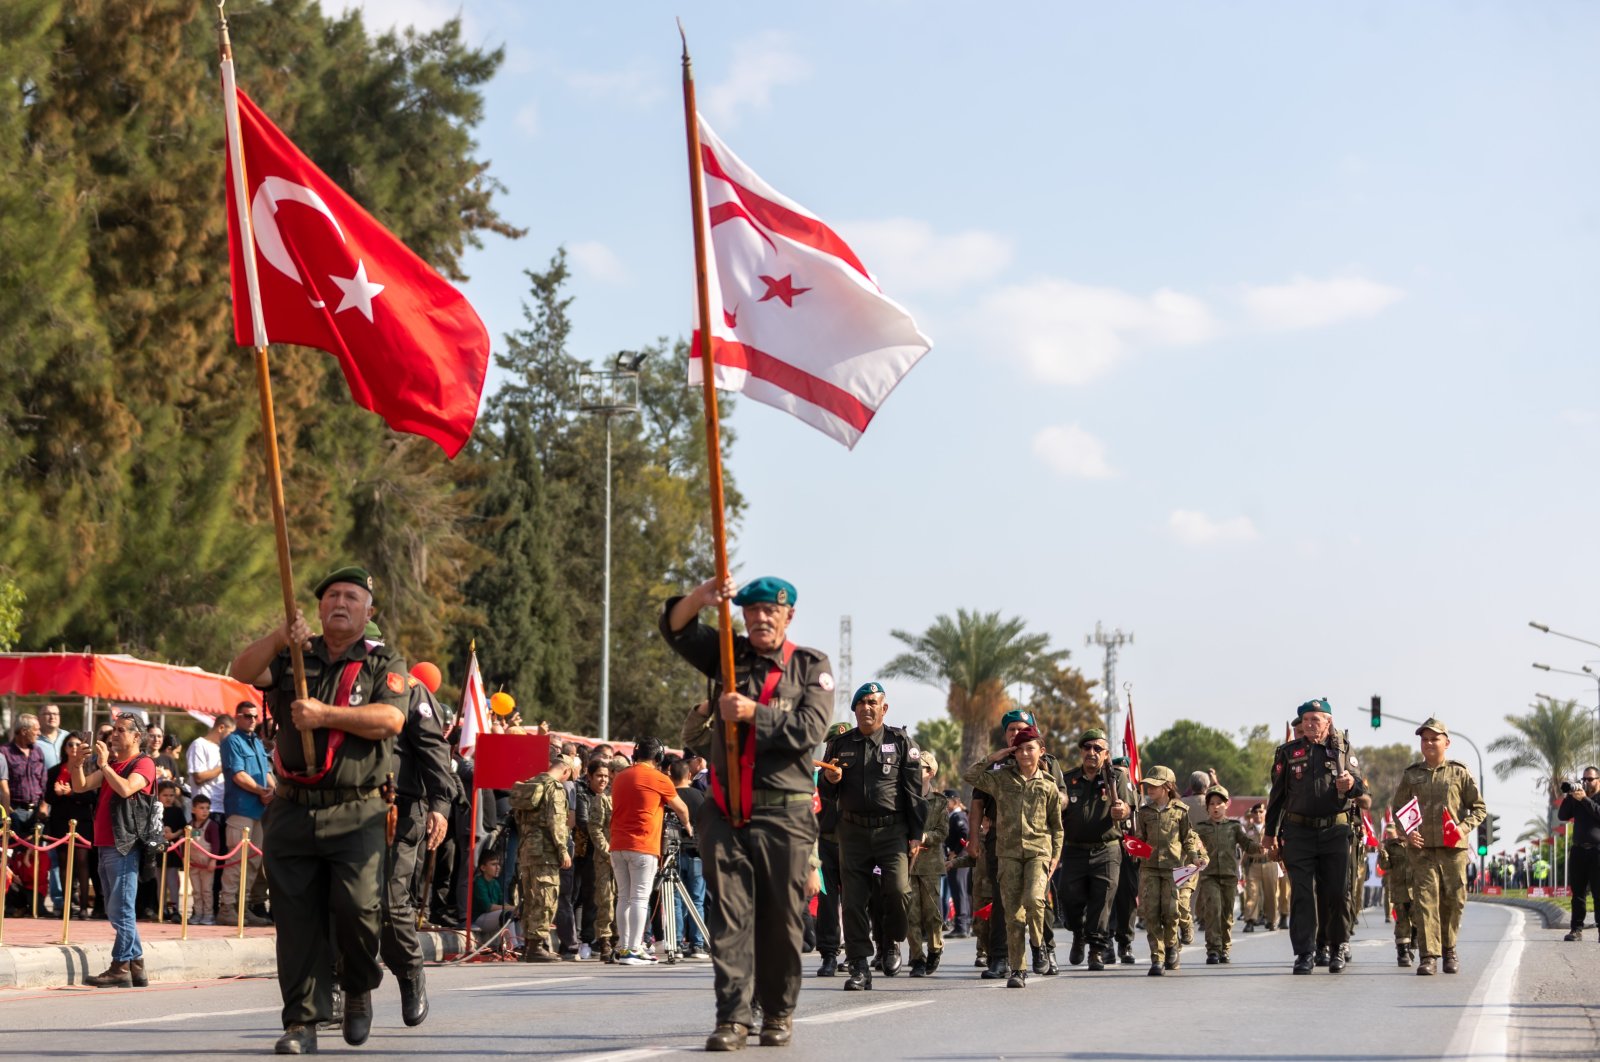 An official procession advances on Dr. Fazıl Küçük Boulevard to mark the 39th anniversary of the Turkish Republic of Northern Cyprus&#039; (TRNC) independence, in Lefkoşa (Nicosia), TRNC, Nov. 15, 2022. (AA Photo)